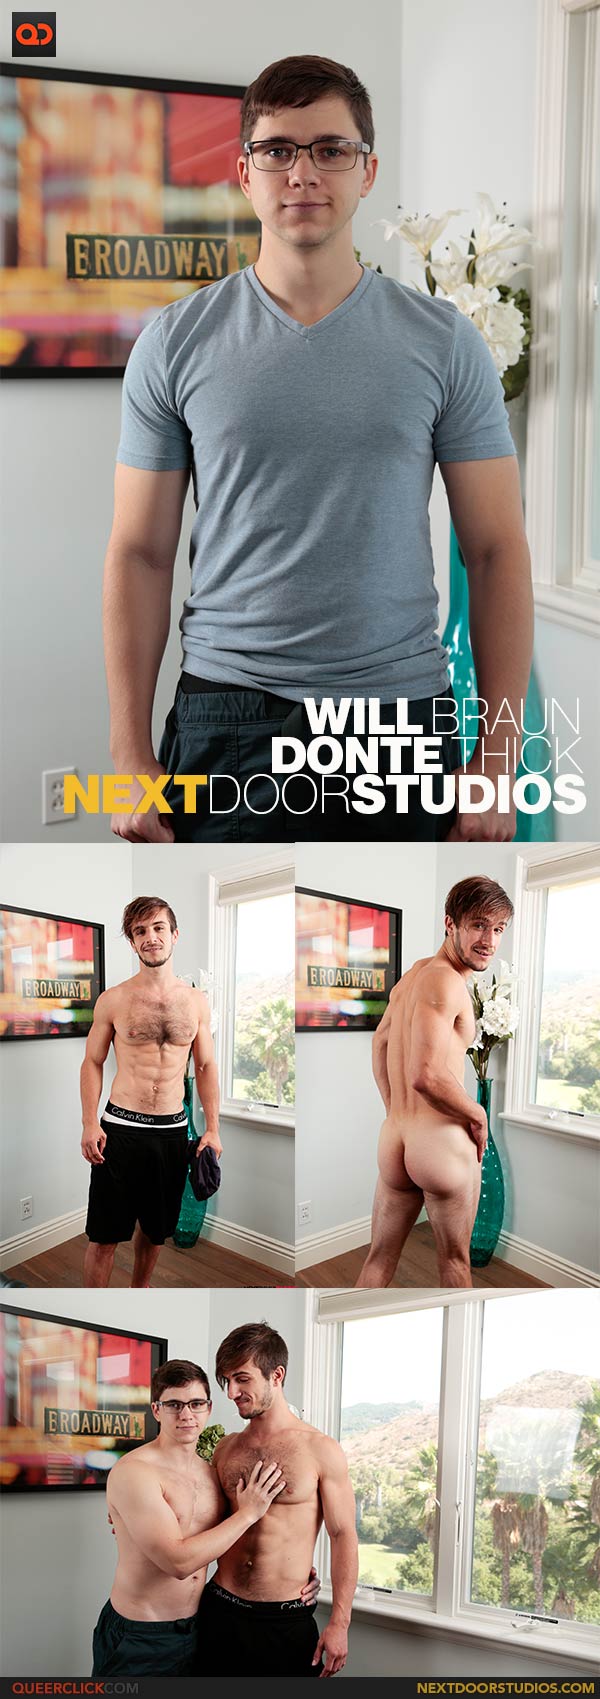 Next Door Taboo: Donte Thick and Will Braun